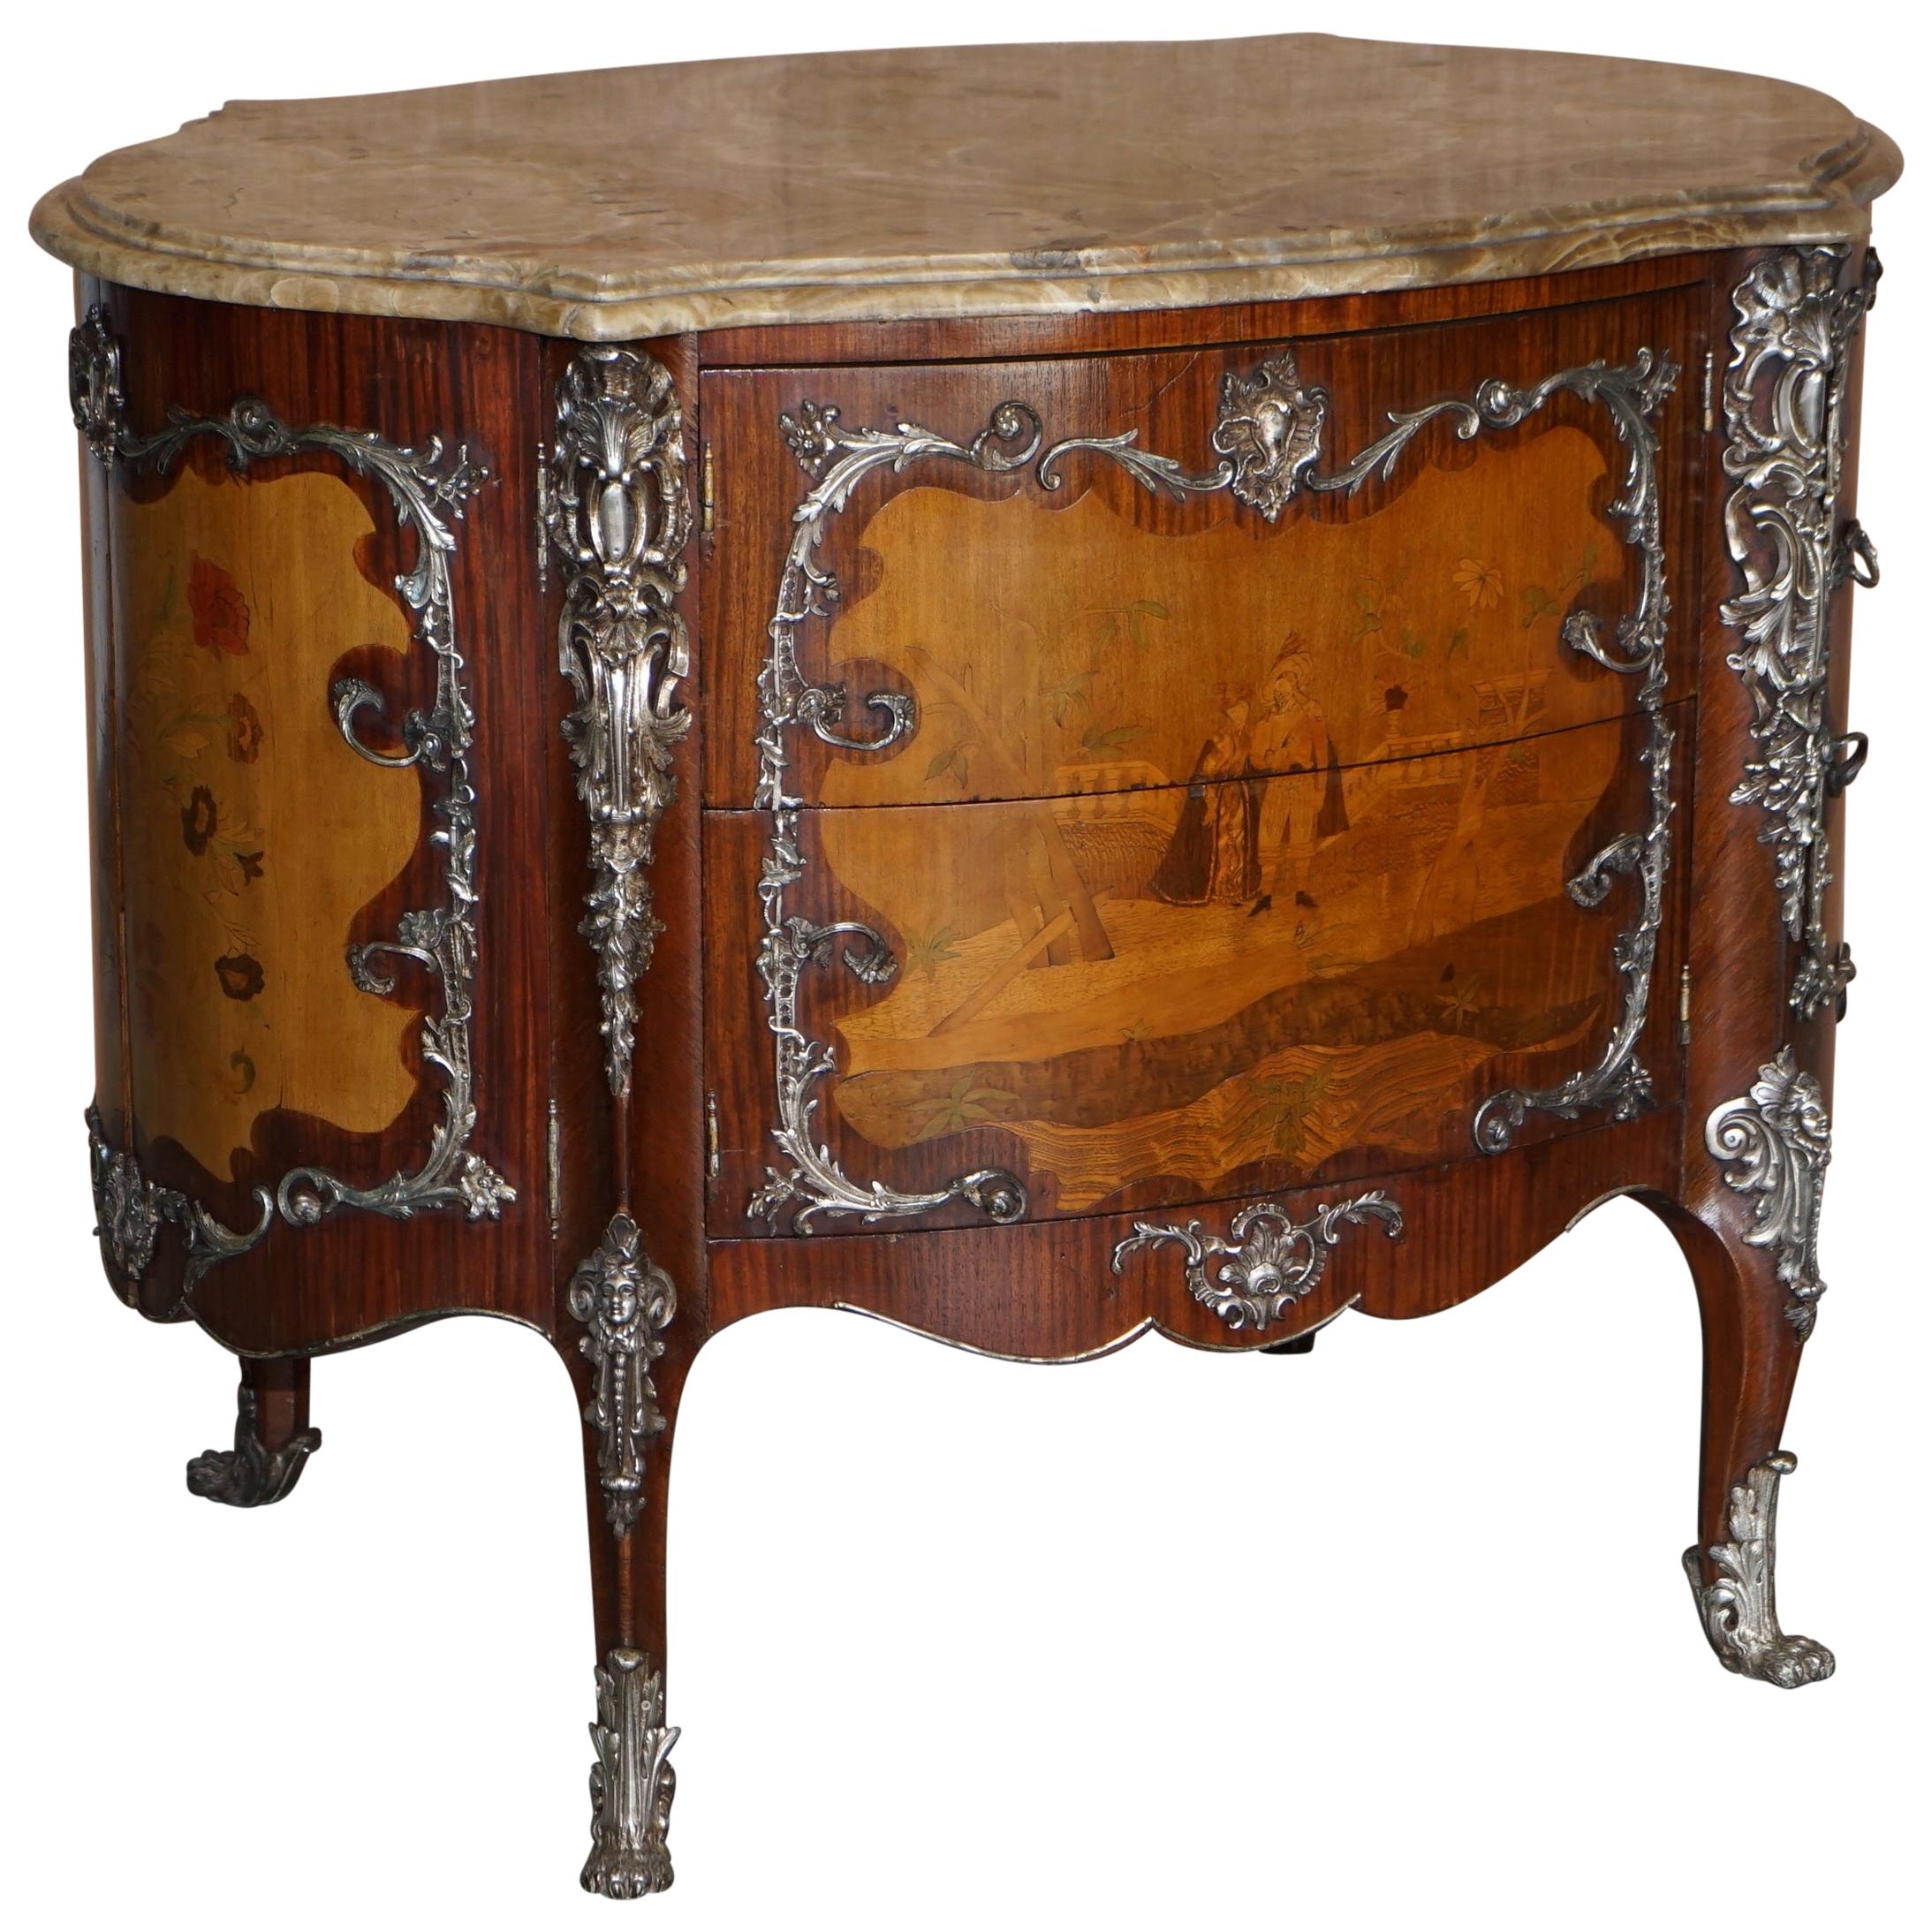 Rare & Collectable Germain Landrin circa 1750 French Marble Kingwood Sideboard For Sale